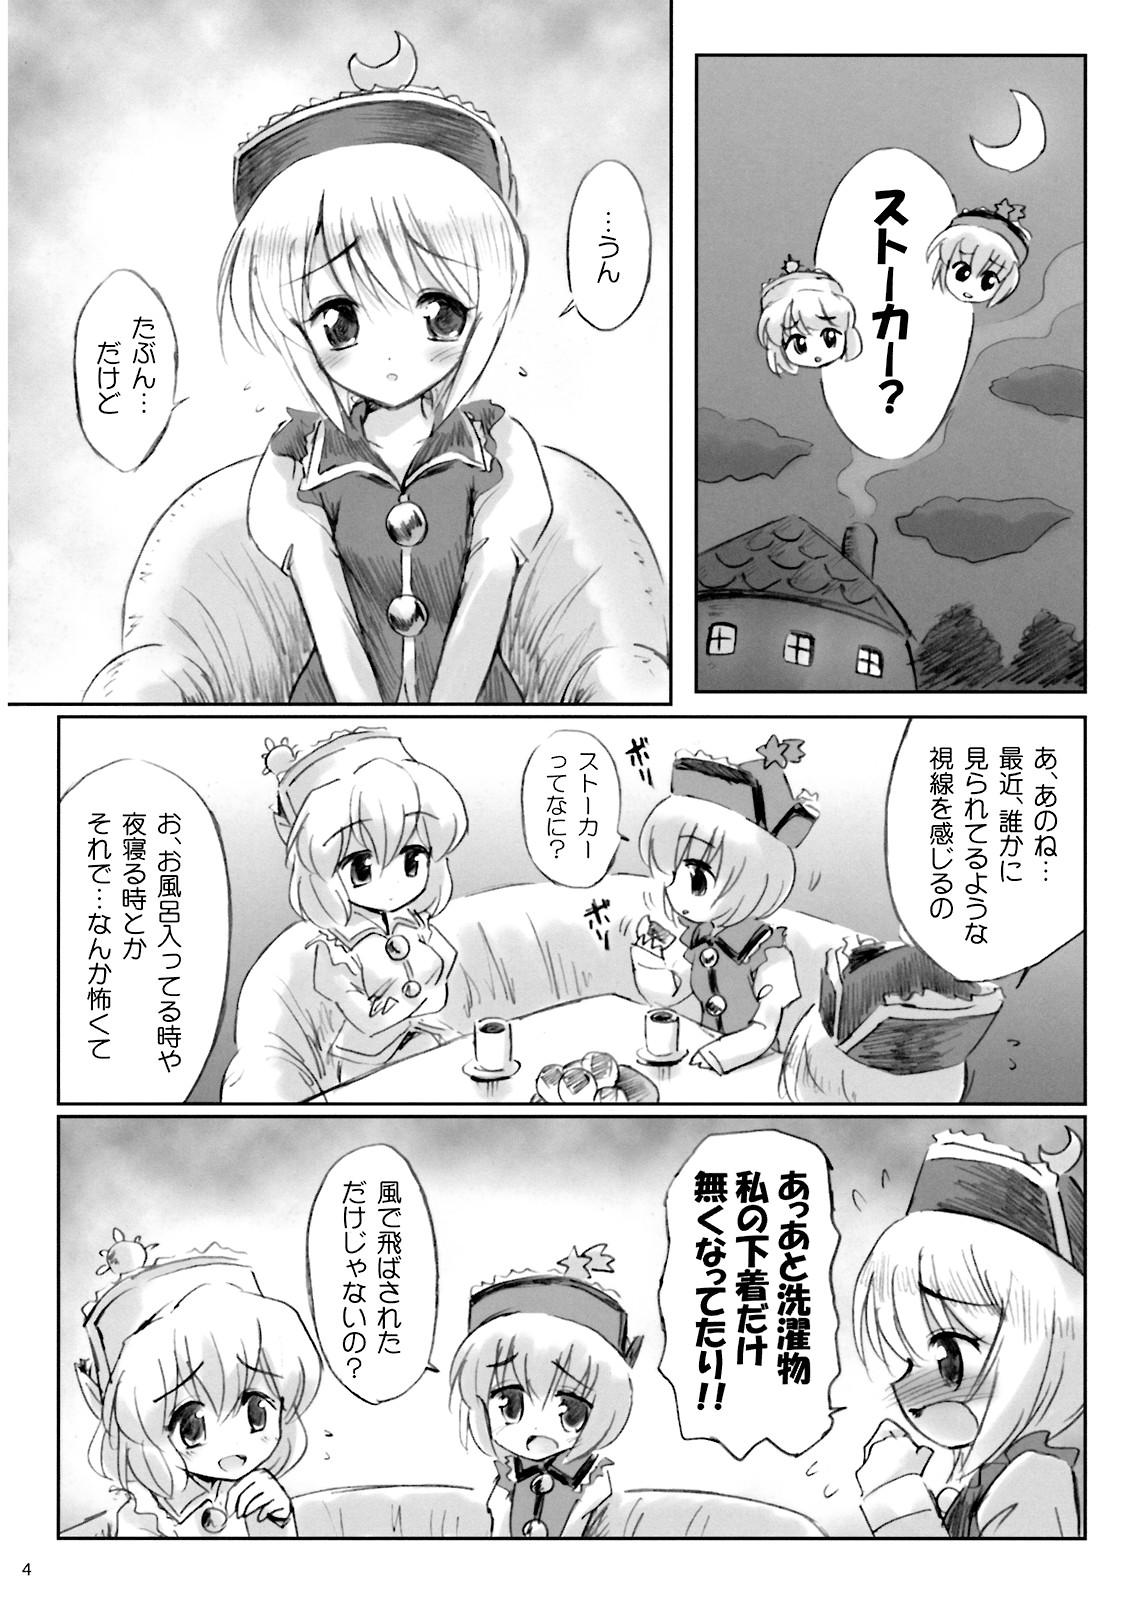 Freckles IDOLMASTER - Touhou project Tugging - Page 3